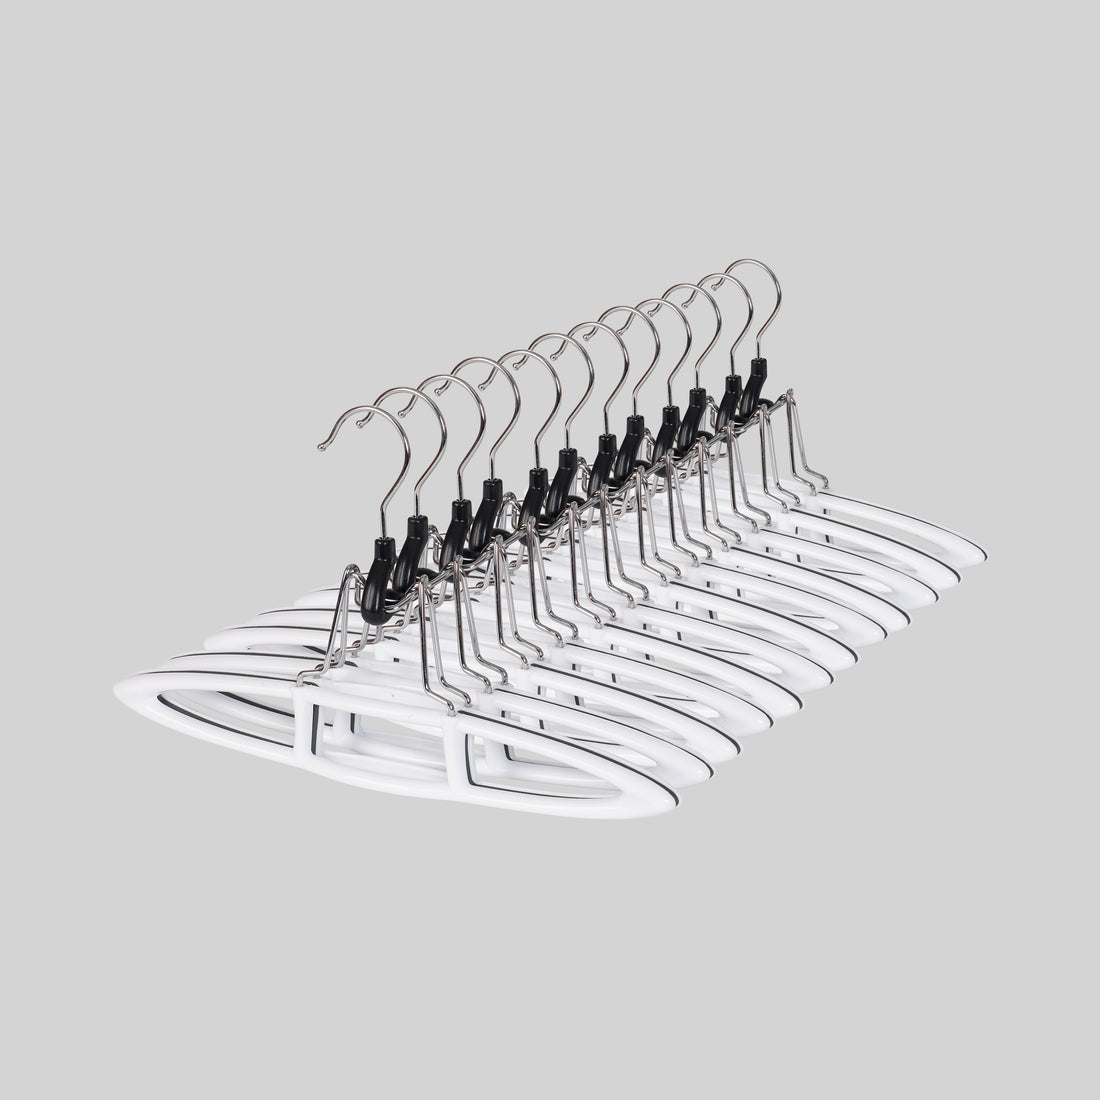 Set of 5 Deluxe Non Slip Hangers by Neatfreak! - Space Saving Hangers for  Clothes, Pants, Jackets and Shirt 5 Pack,White/Grey